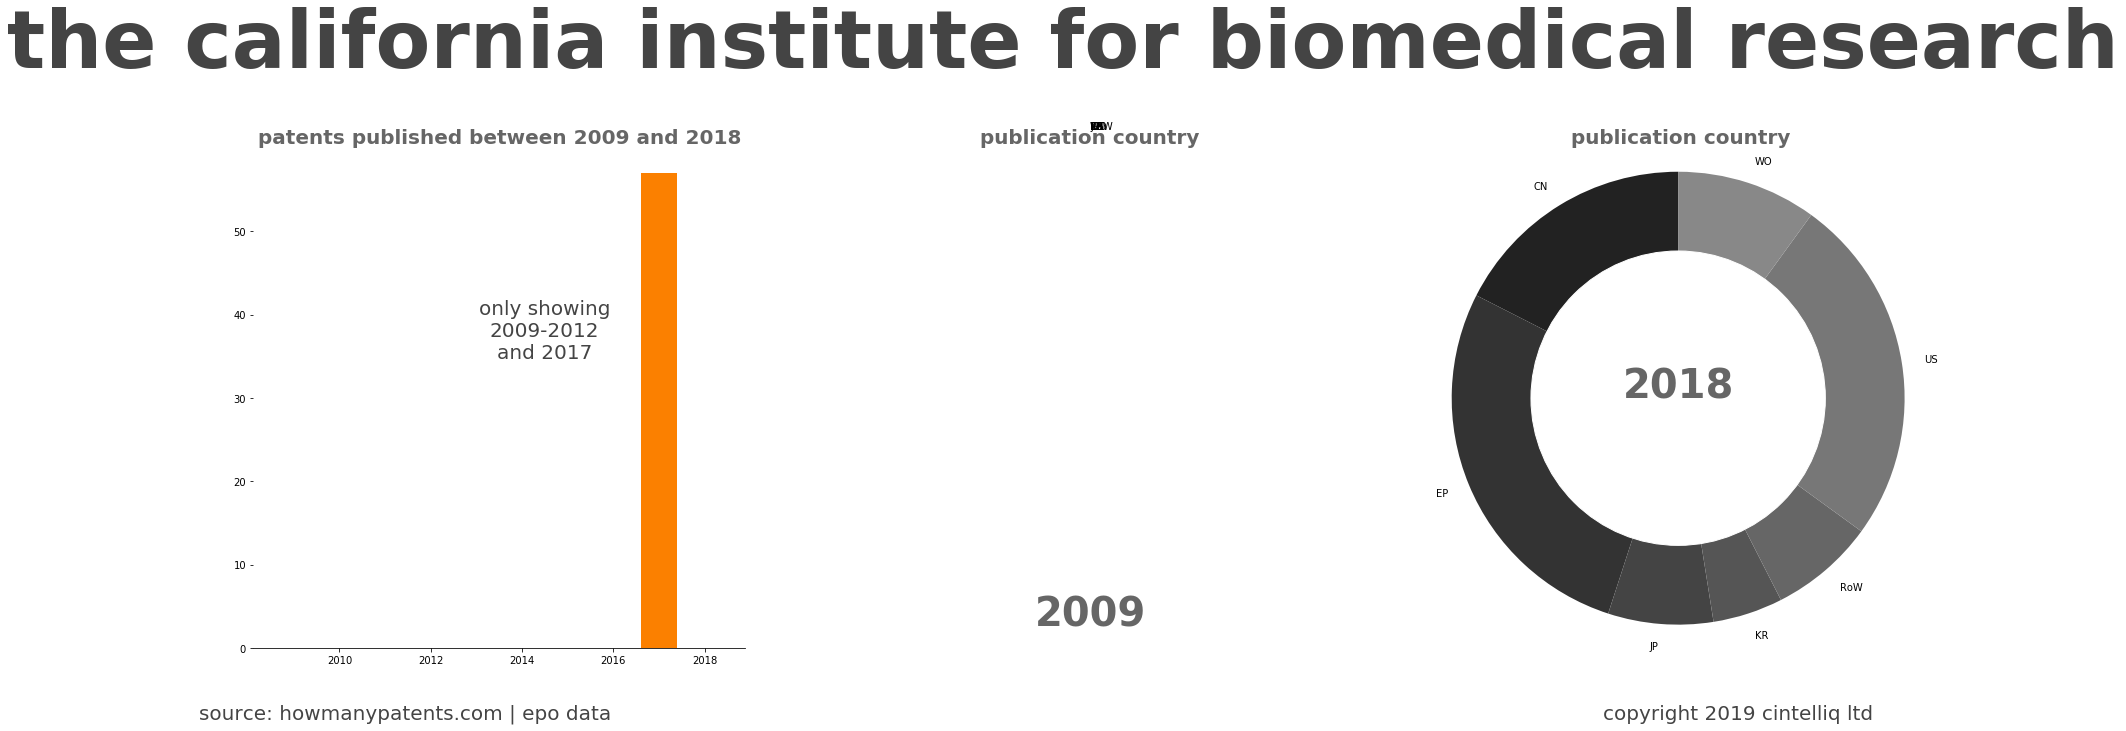 summary of patents for The California Institute For Biomedical Research